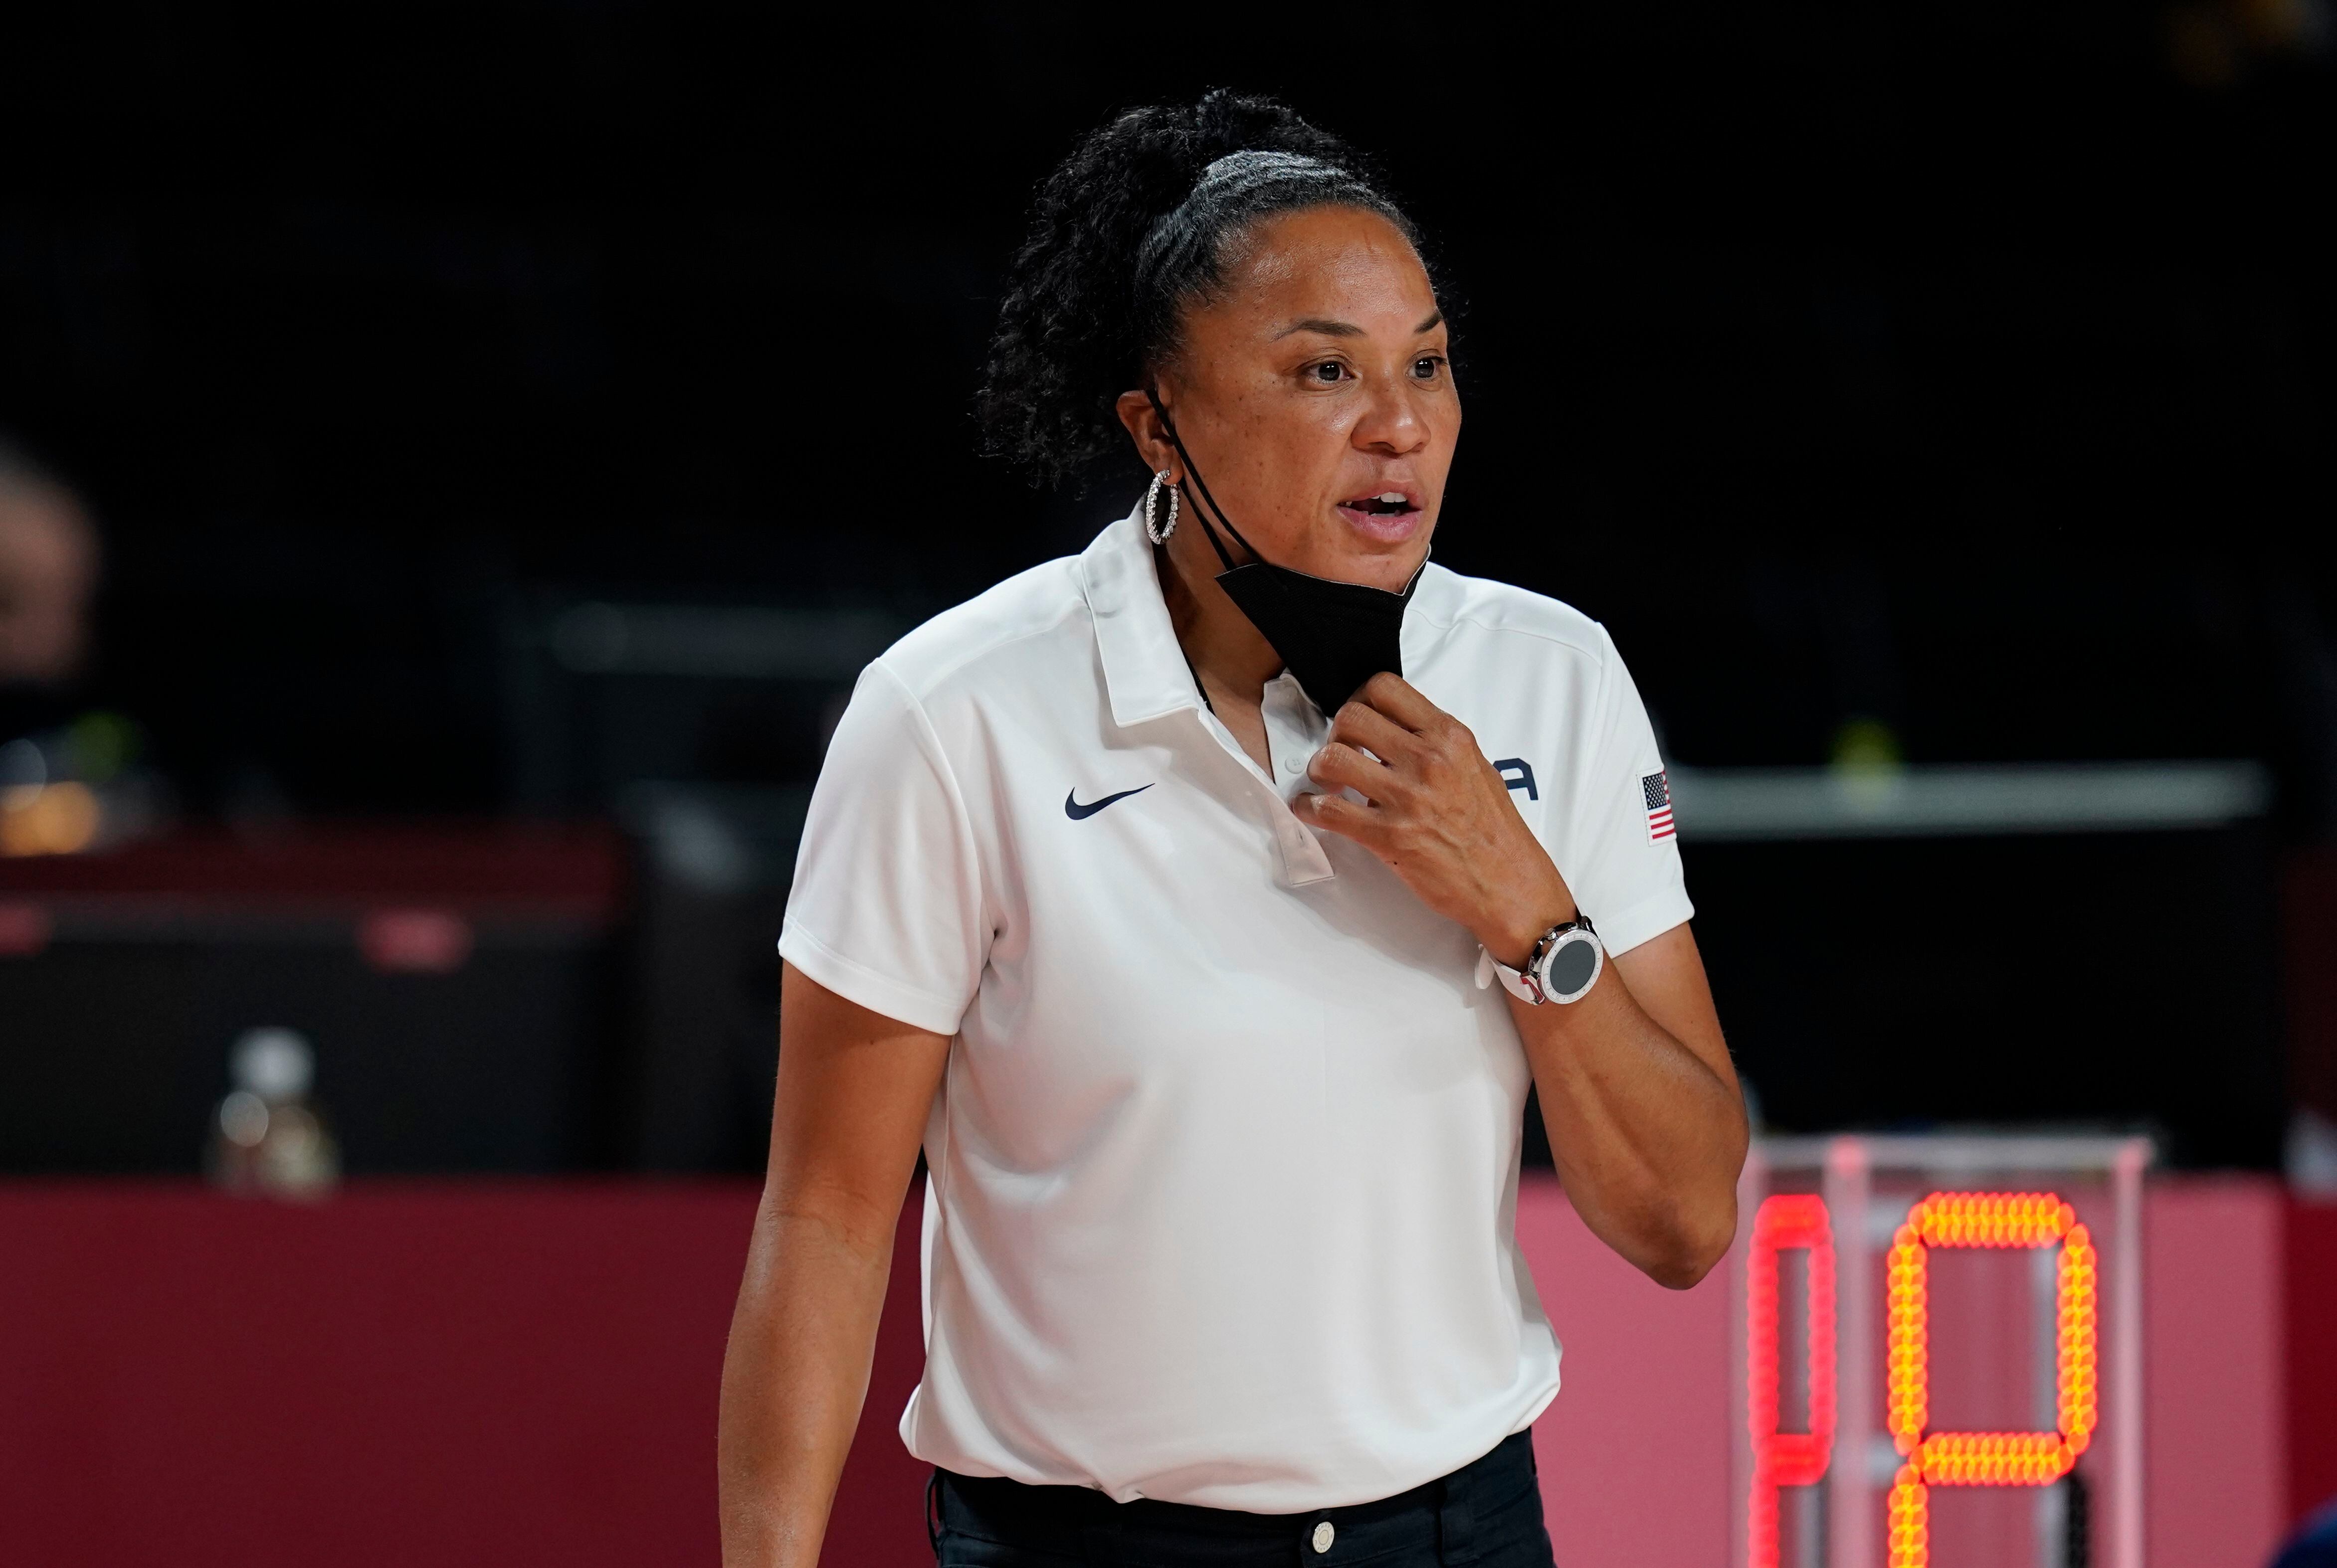 Will Coach Dawn Staley's beloved pooch dribble his way to Paris?